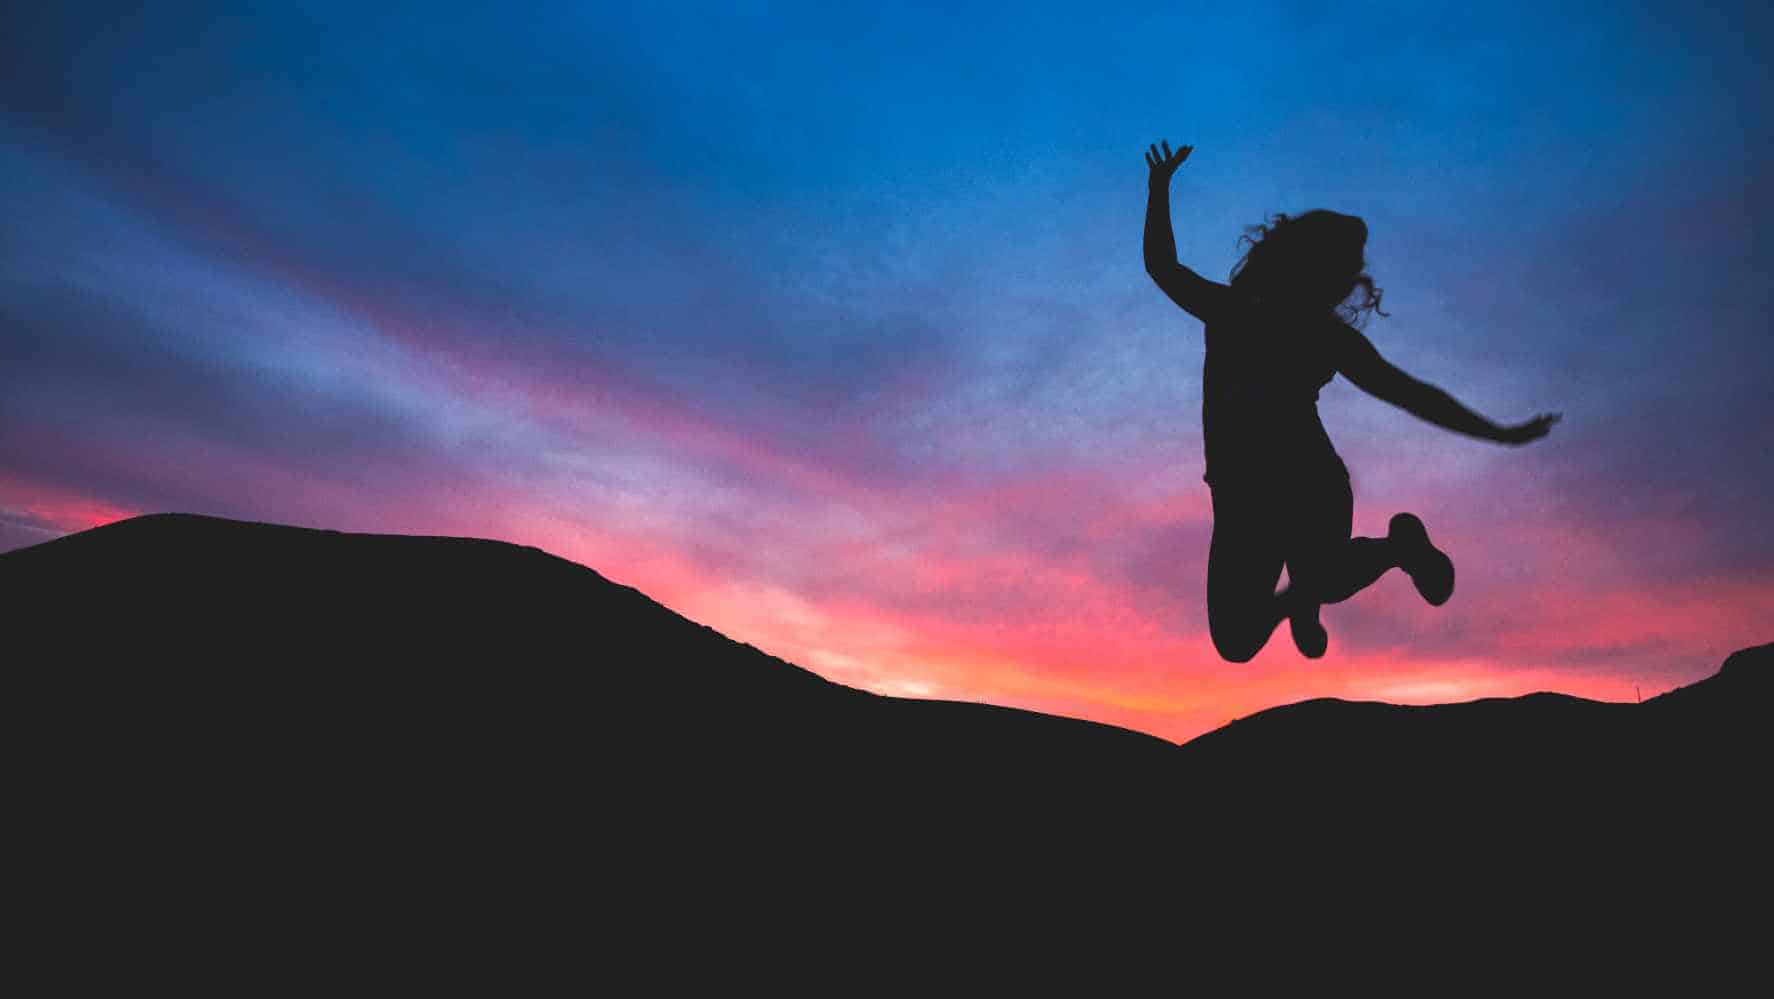 A person jumping in the air with a sunrise background to show benefits of counselling / therapy